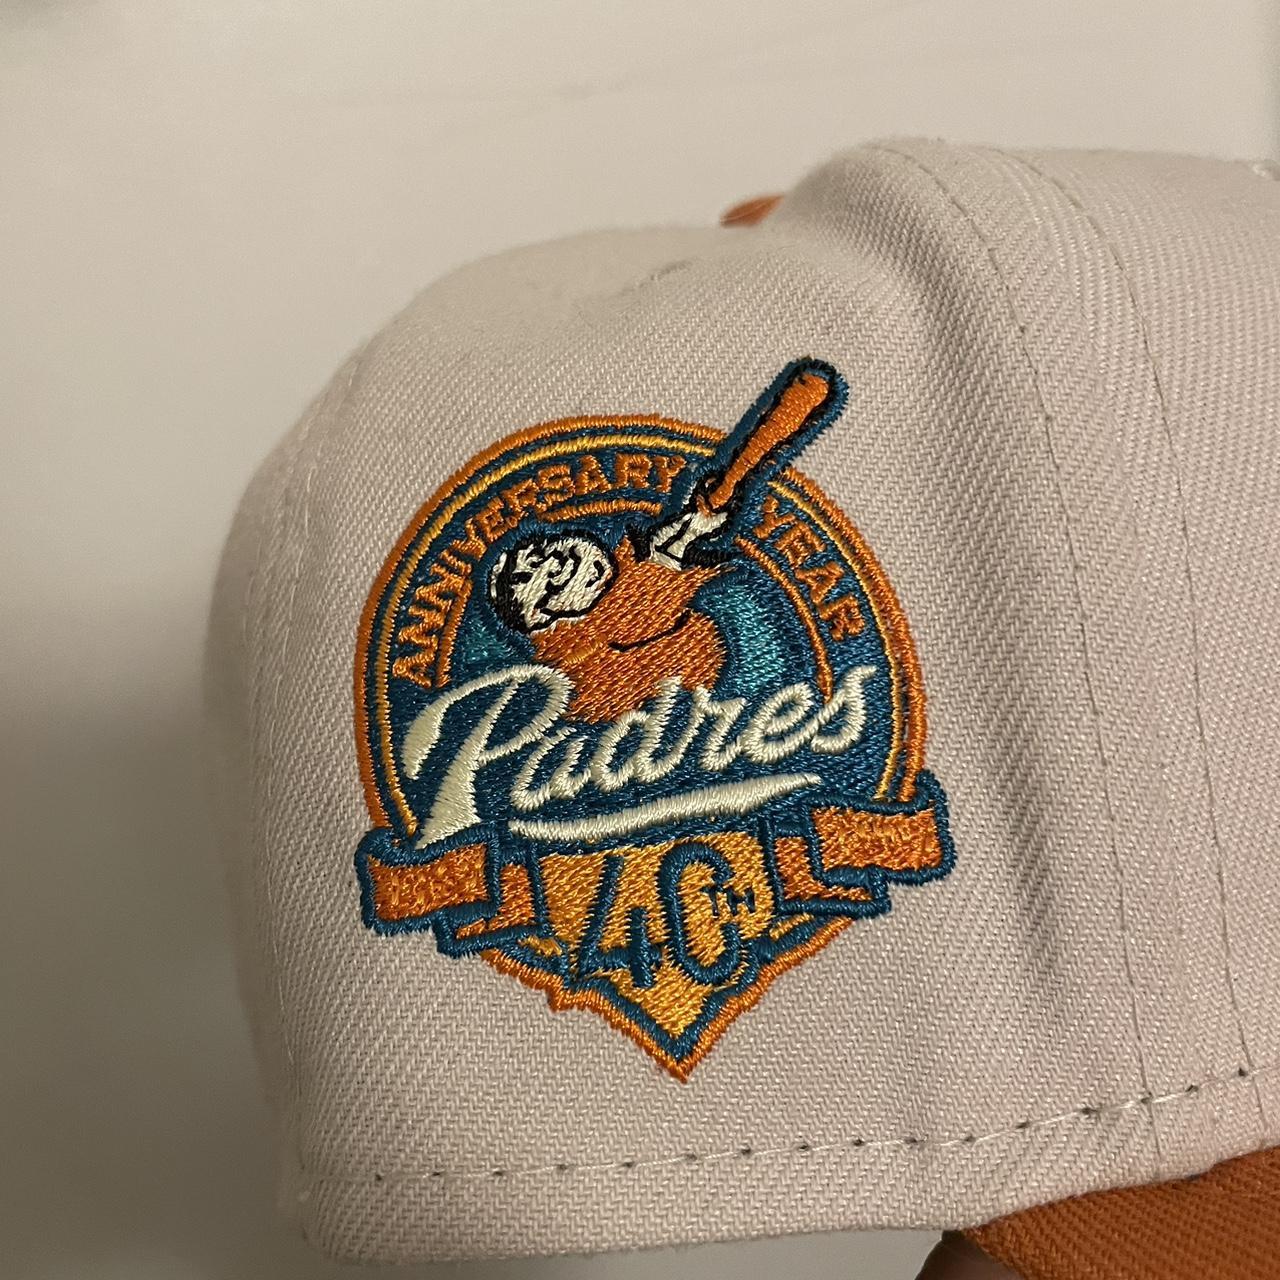 Hat club San Diego Padres size 7 1/4 u new sold out - Depop